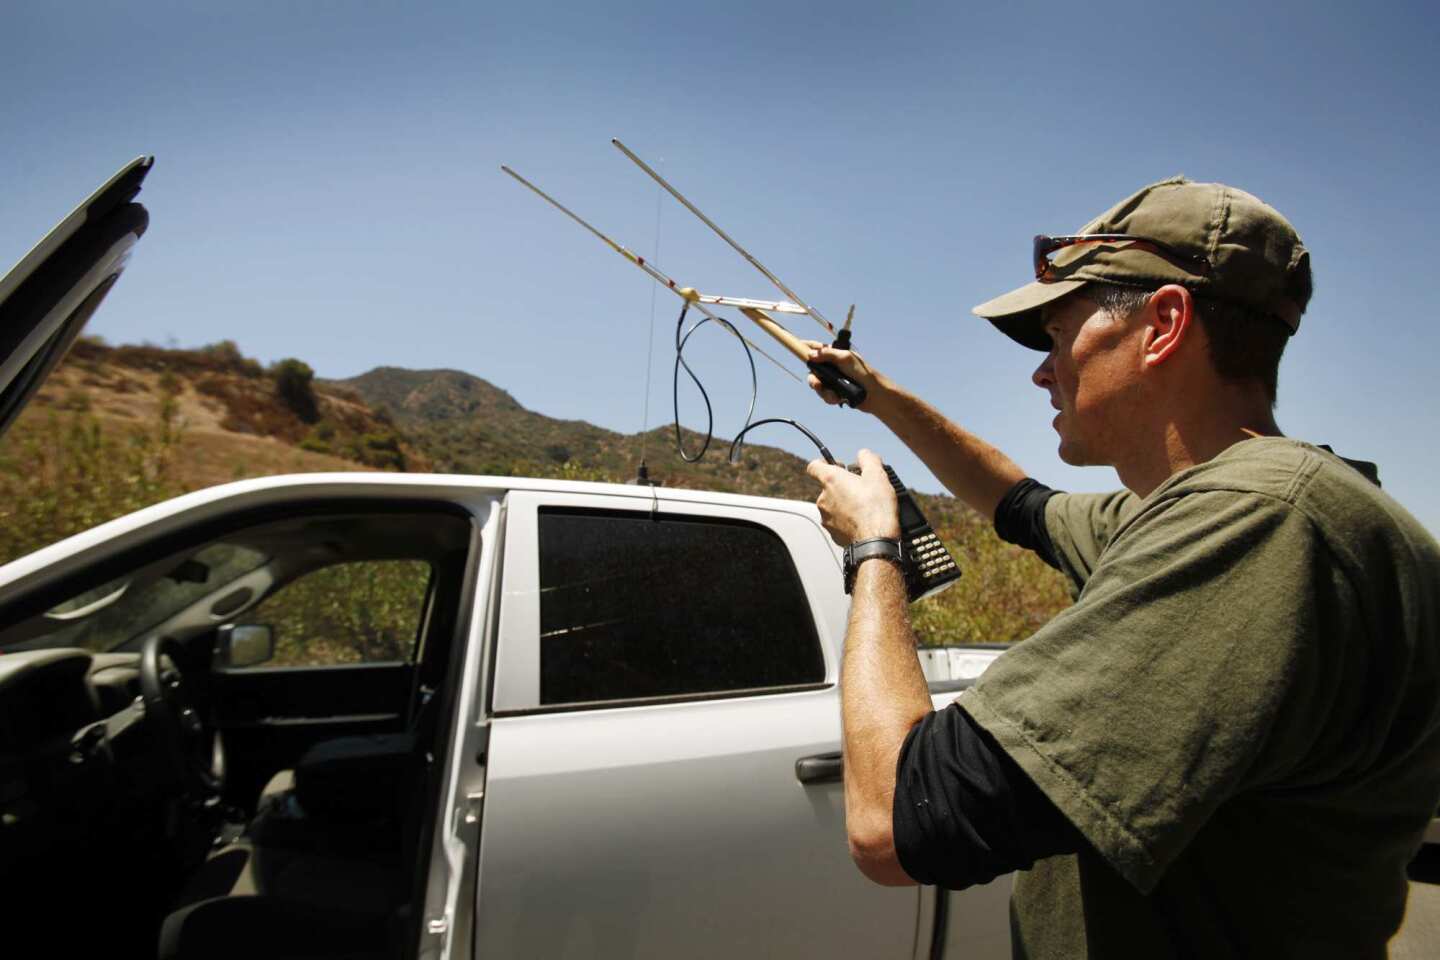 Jeff Sikich, wildlife biologist with the National Park Service, uses a radio receiver near Griffith Park to monitor possible activity by mountain lion P-22. Sikich is using radio telemetry to monitor P-22 and hopes to recapture the lion to attach a new GPS.